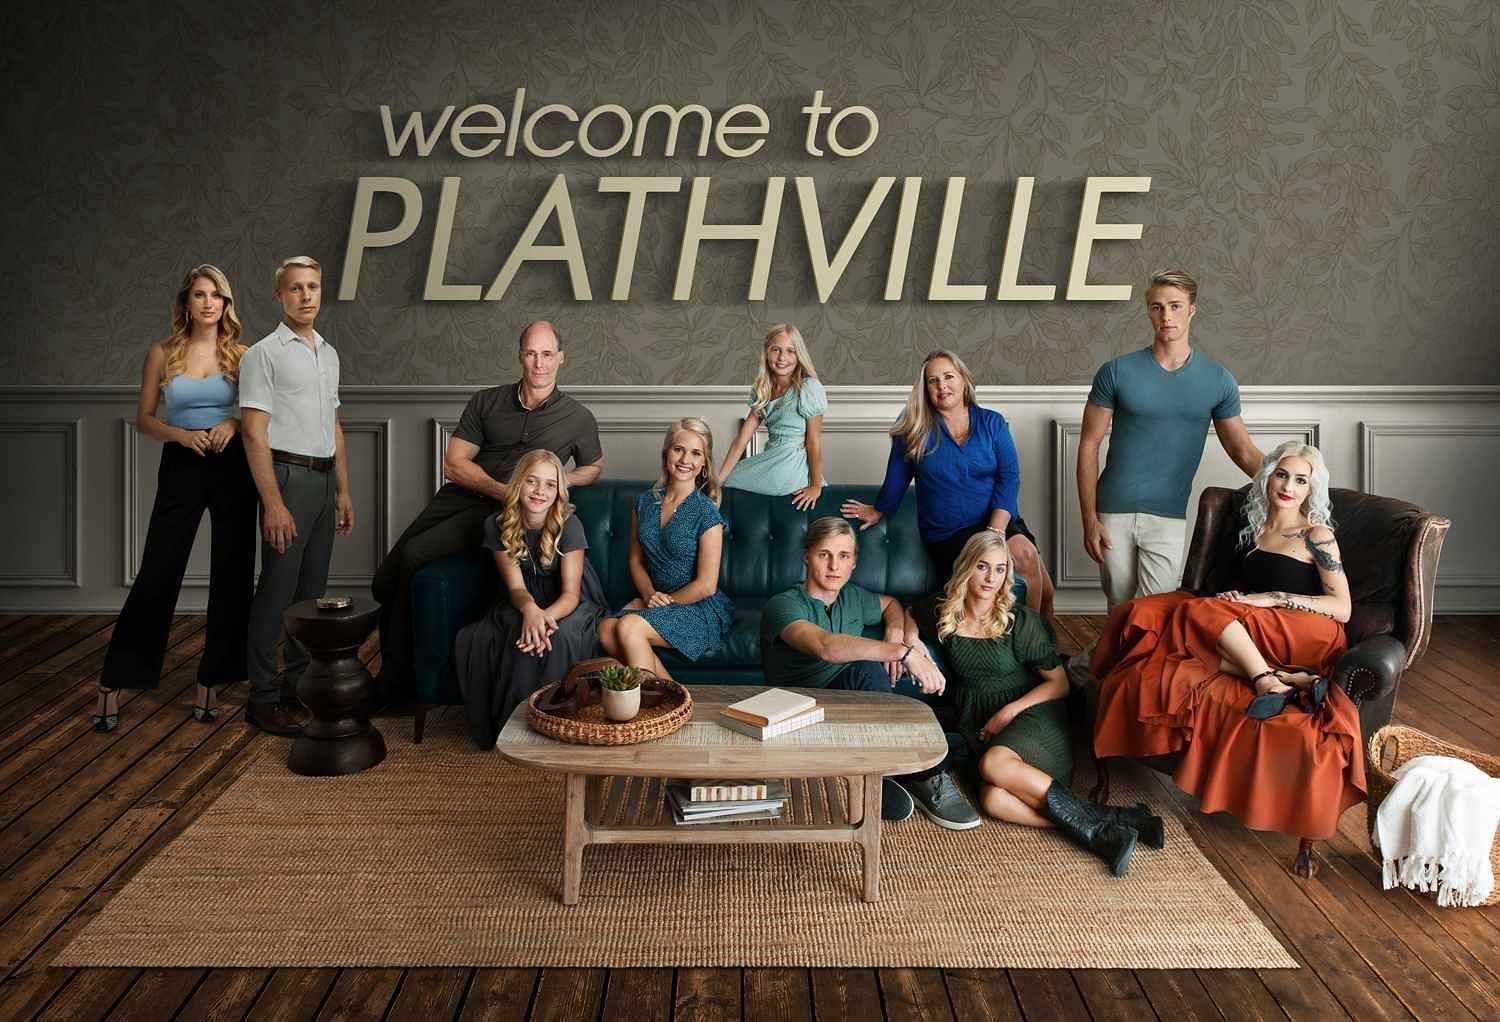 Welcome to Plathville will return to TLC for season 5. (Image via TLC)